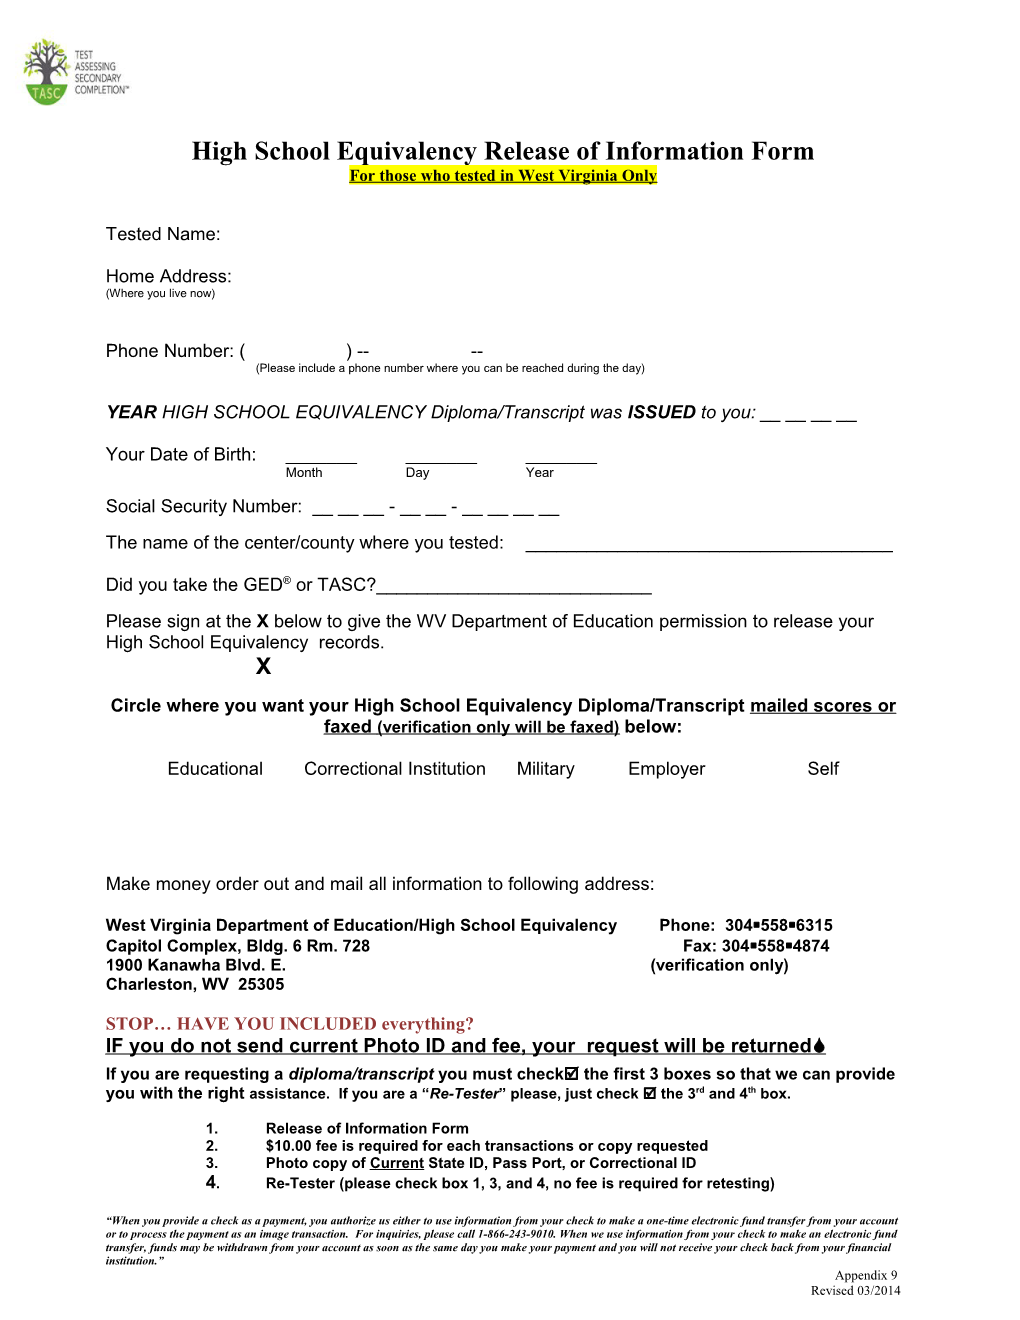 High School Equivalency Release of Information Form